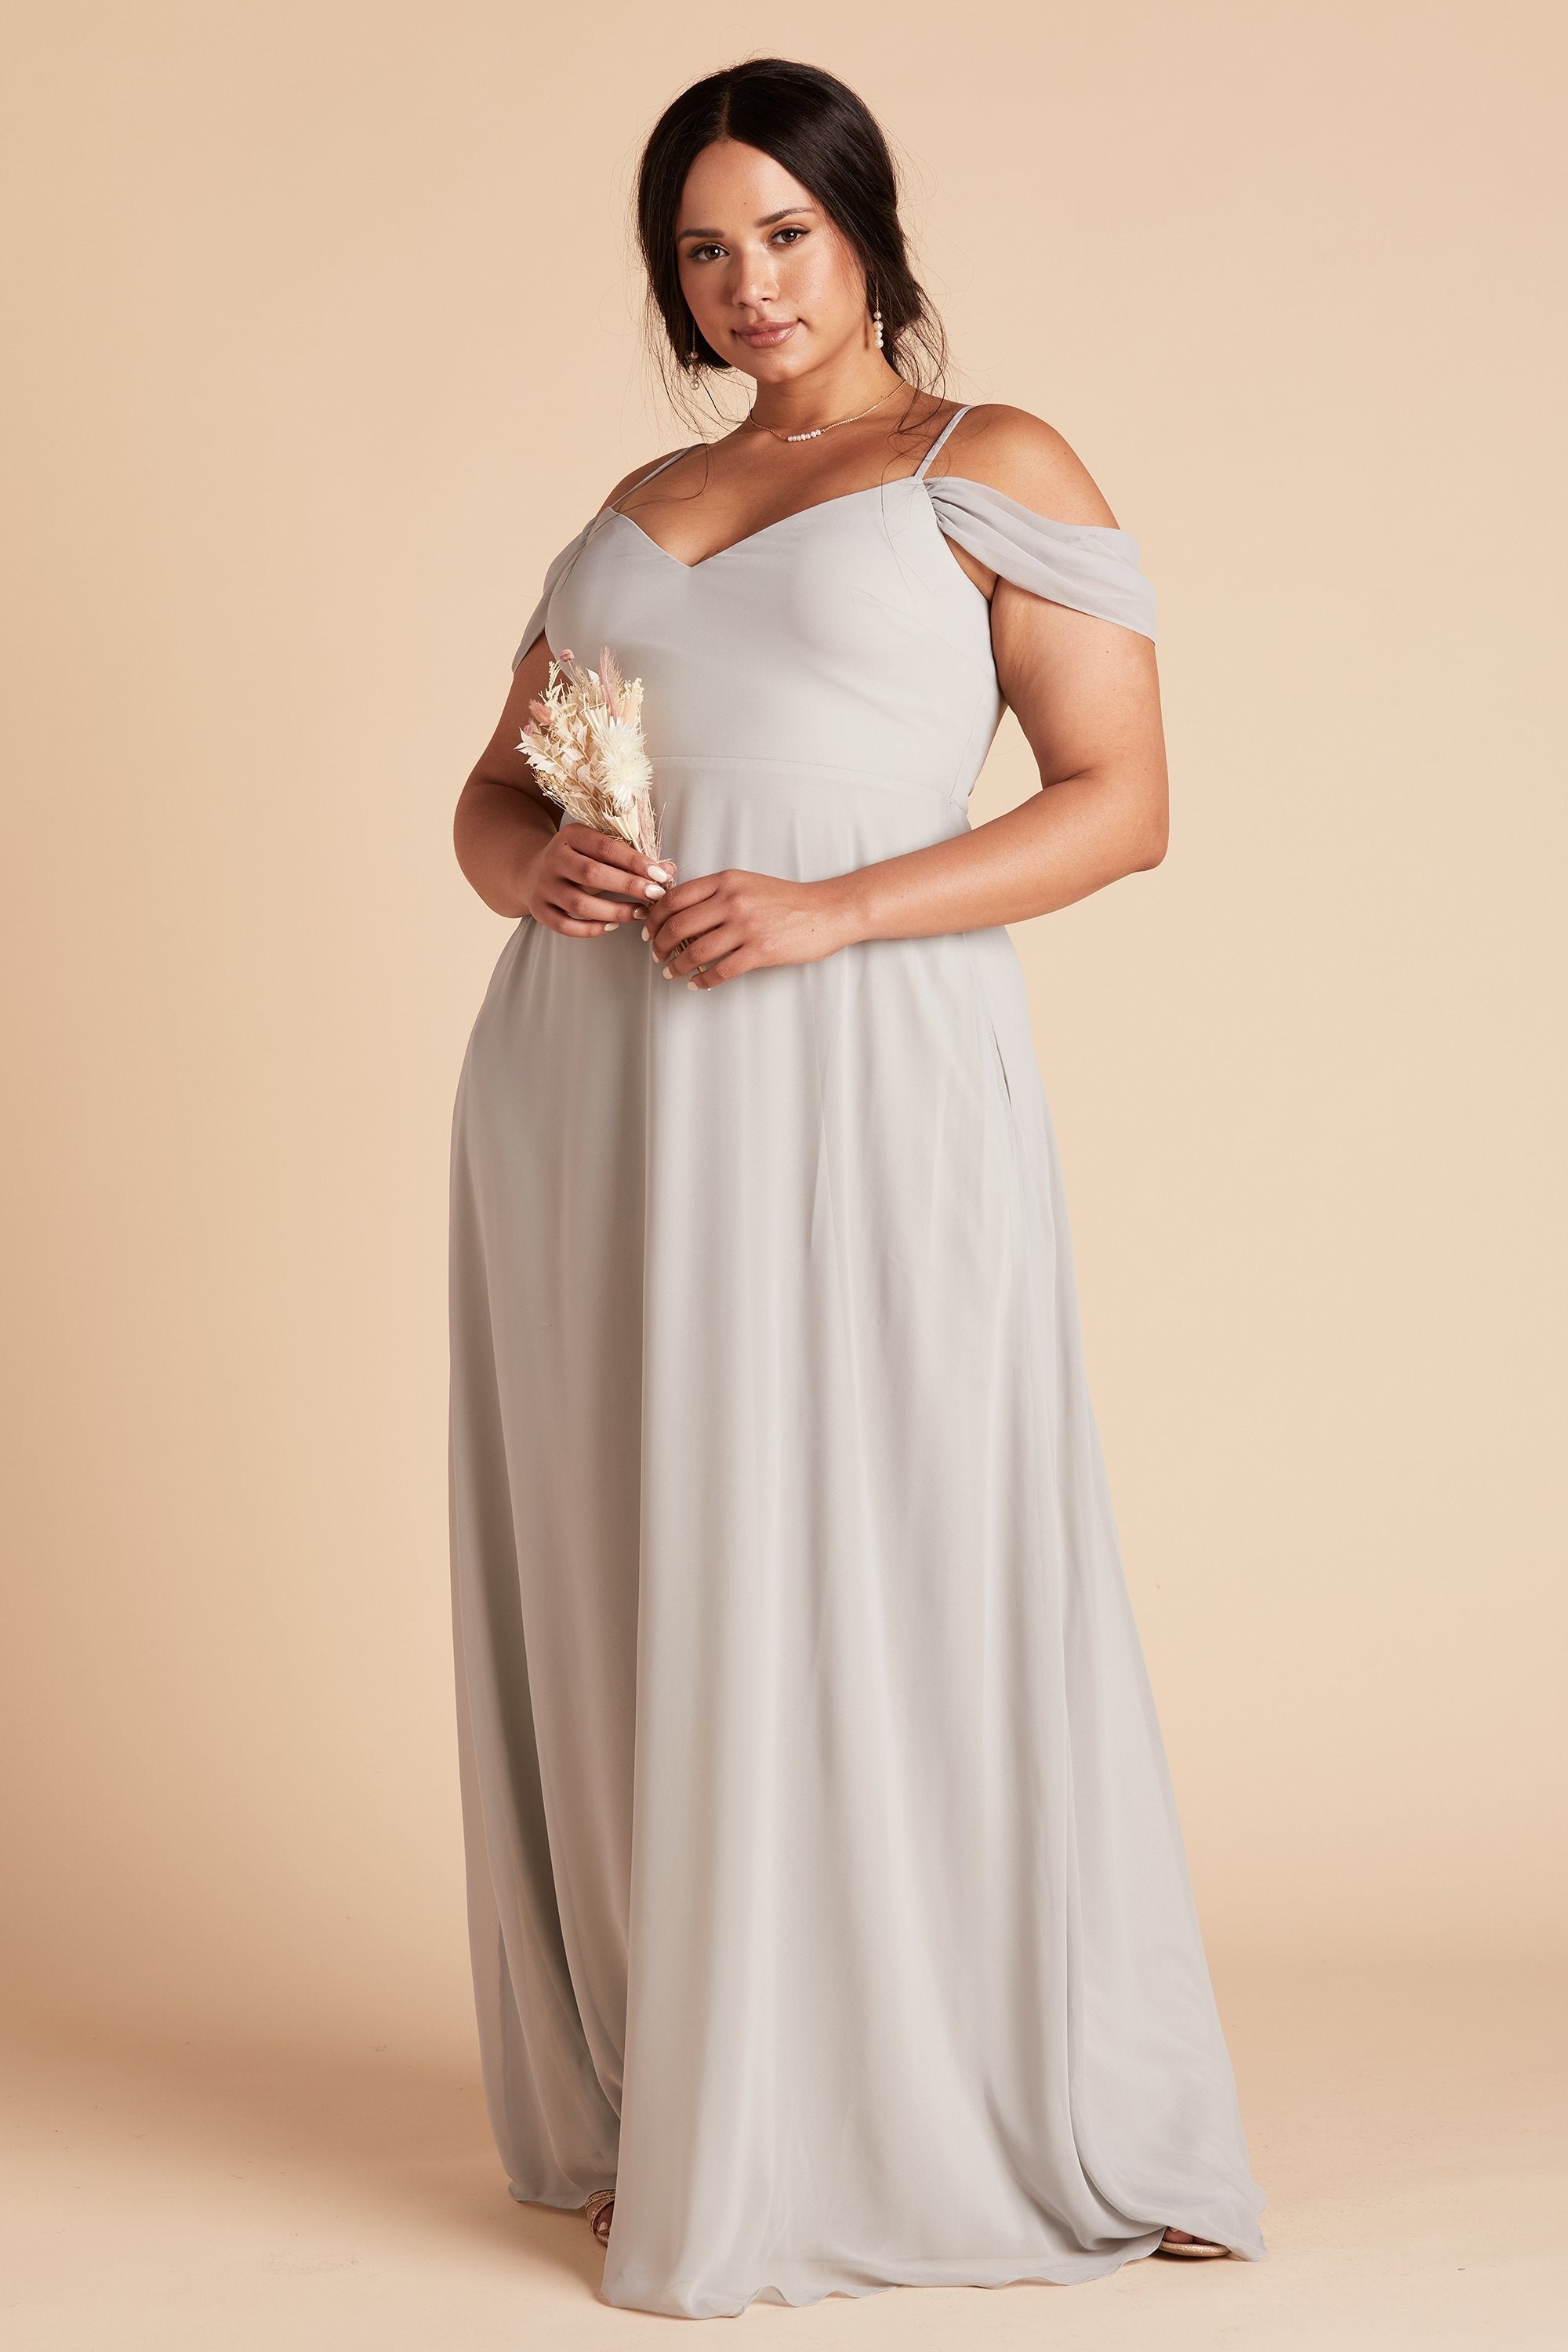 Devin convertible plus size bridesmaid dress with slit in dove gray chiffon by Birdy Grey, side view